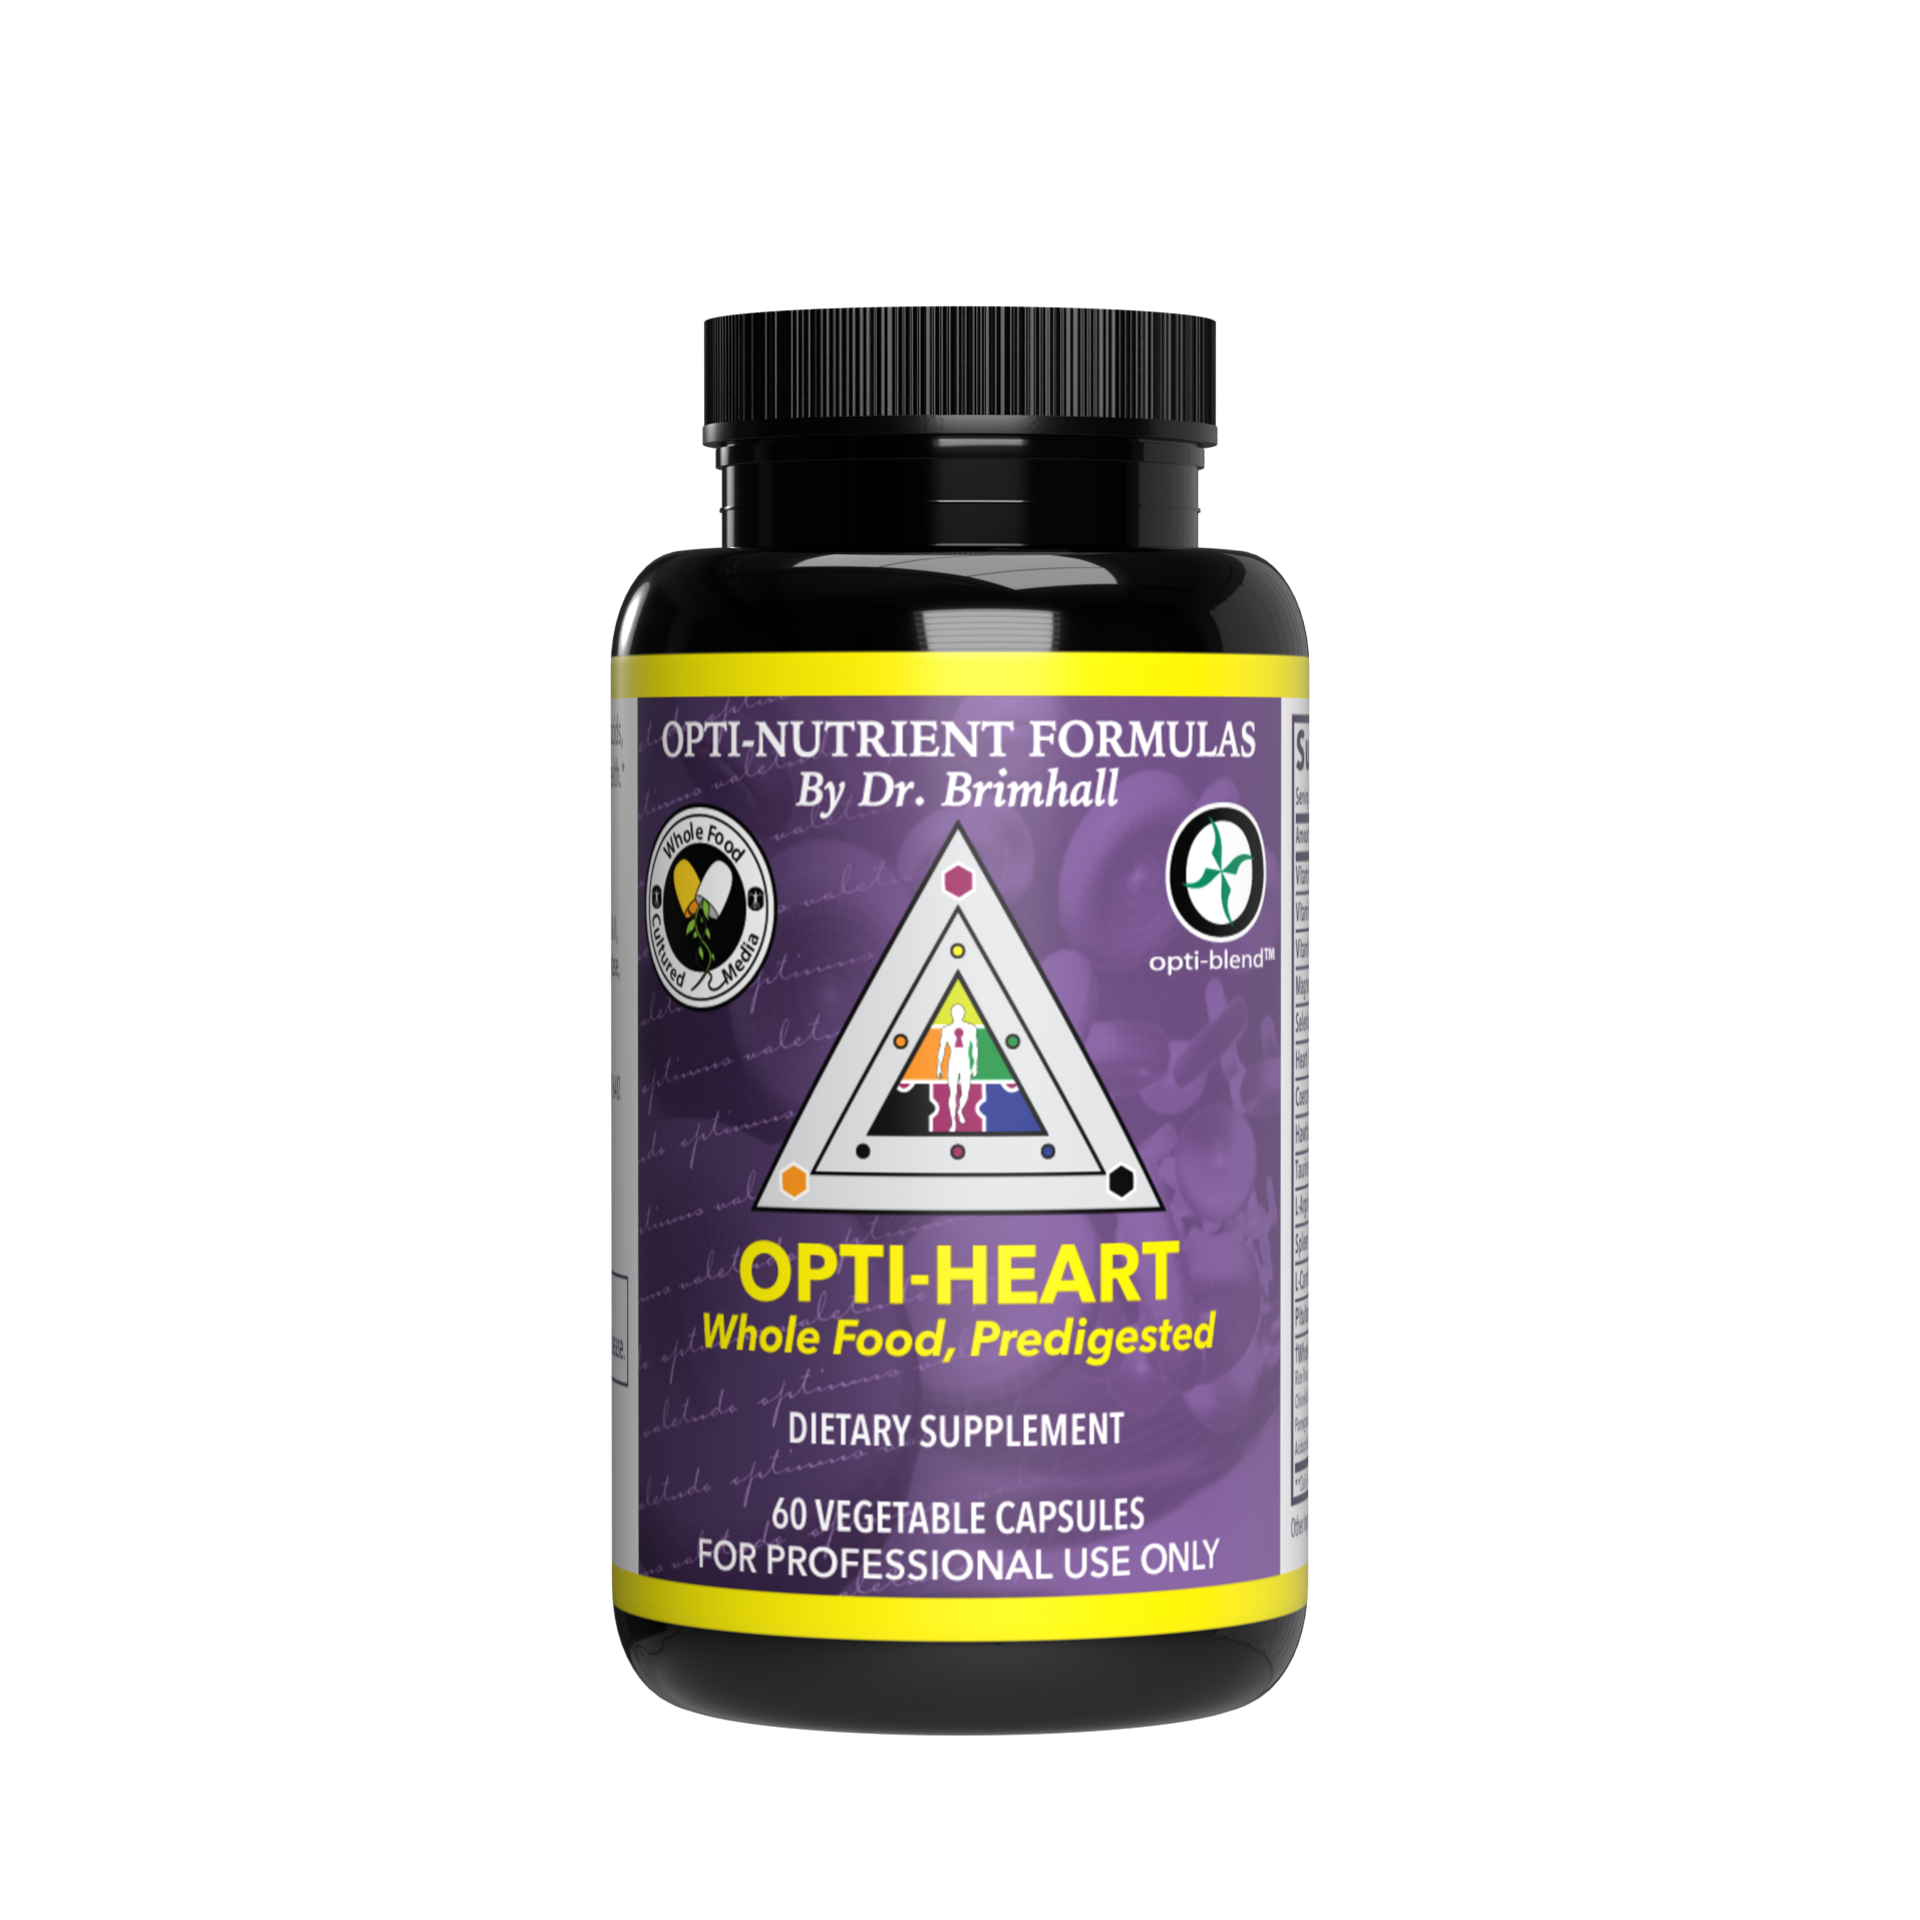 Image of a bottle of Opti-Nutrients Opti-Heart.